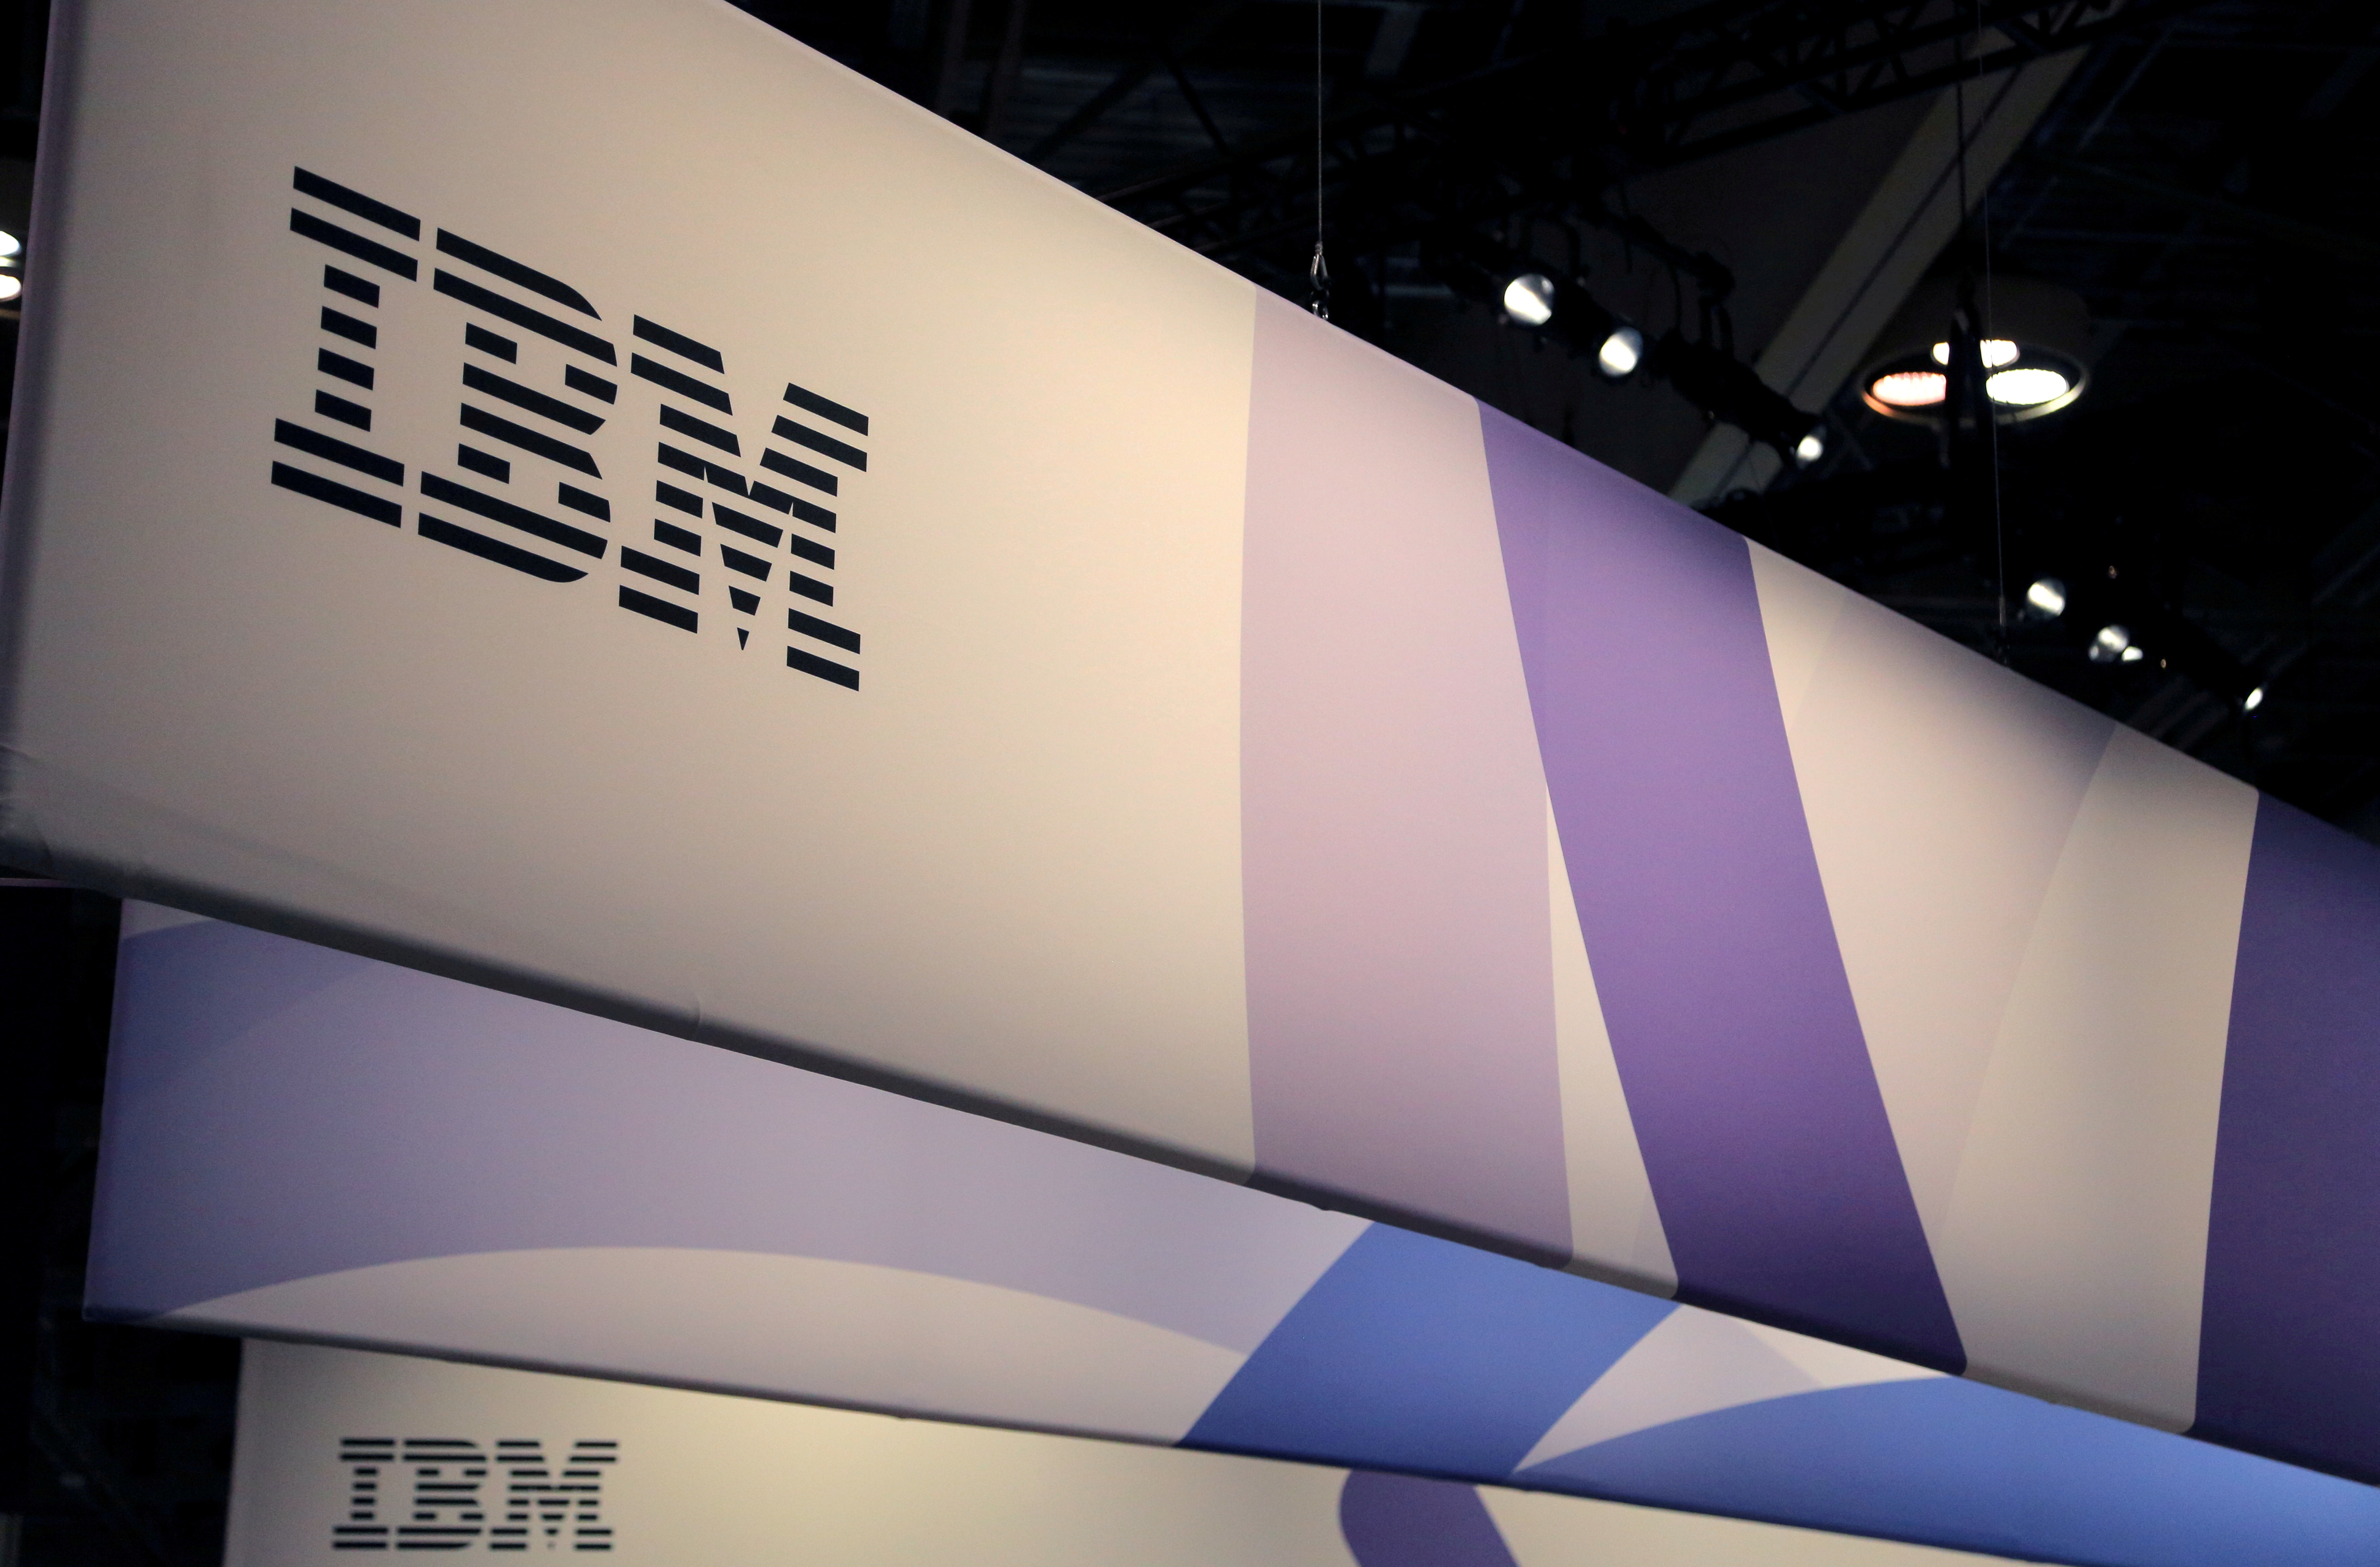 The logo for IBM is seen at the SIBOS banking and financial conference in Toronto, Ontario, Canada October 19, 2017. REUTERS/Chris Helgren